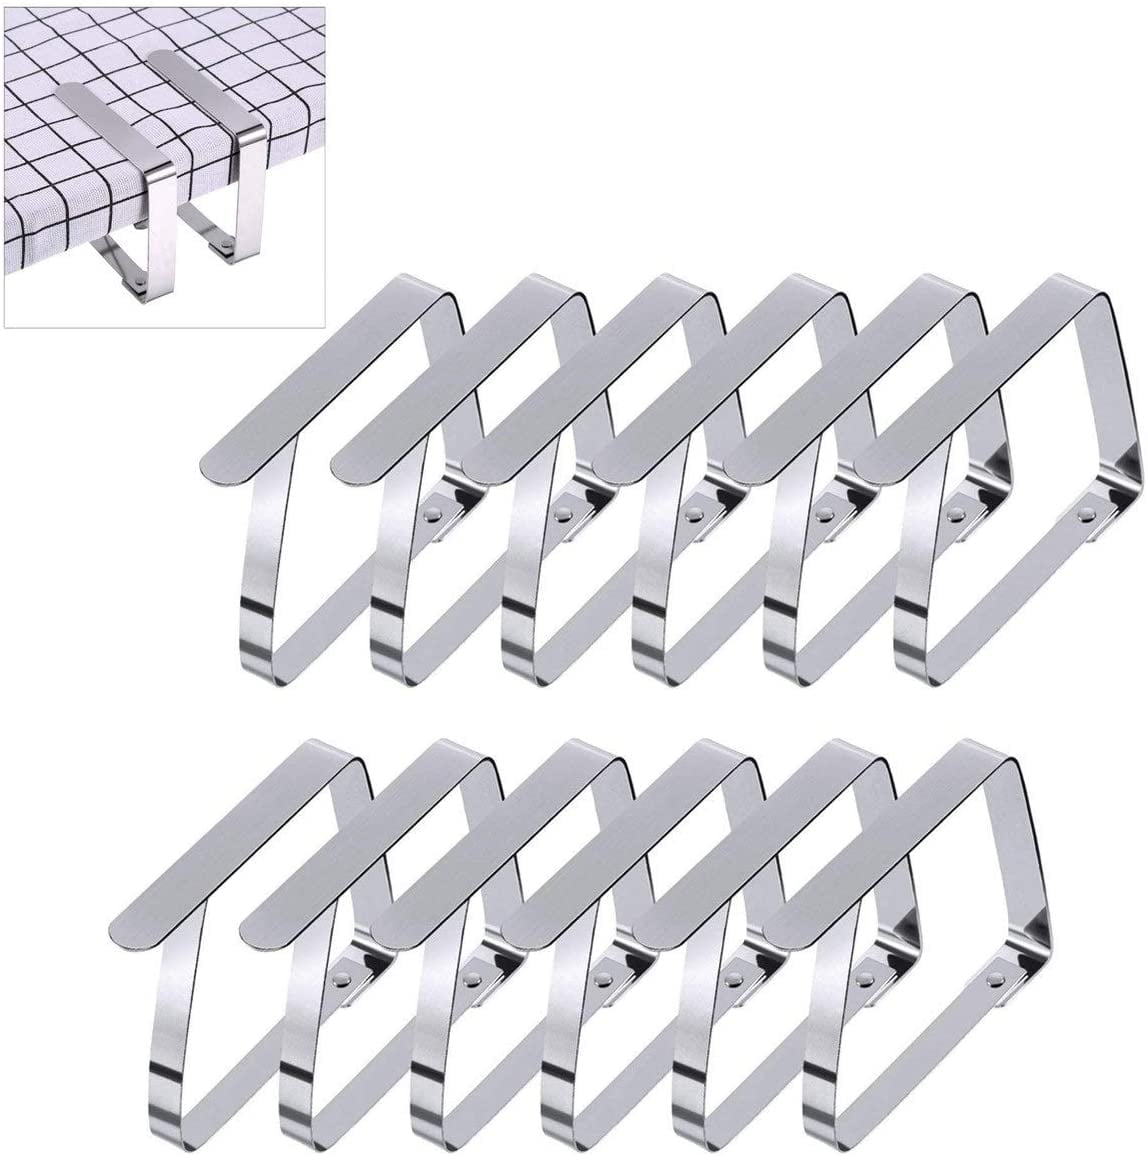 12Pcs Stainless Steel Tablecloth Clips Picnic Table Cloth Holders Cover Clamps 